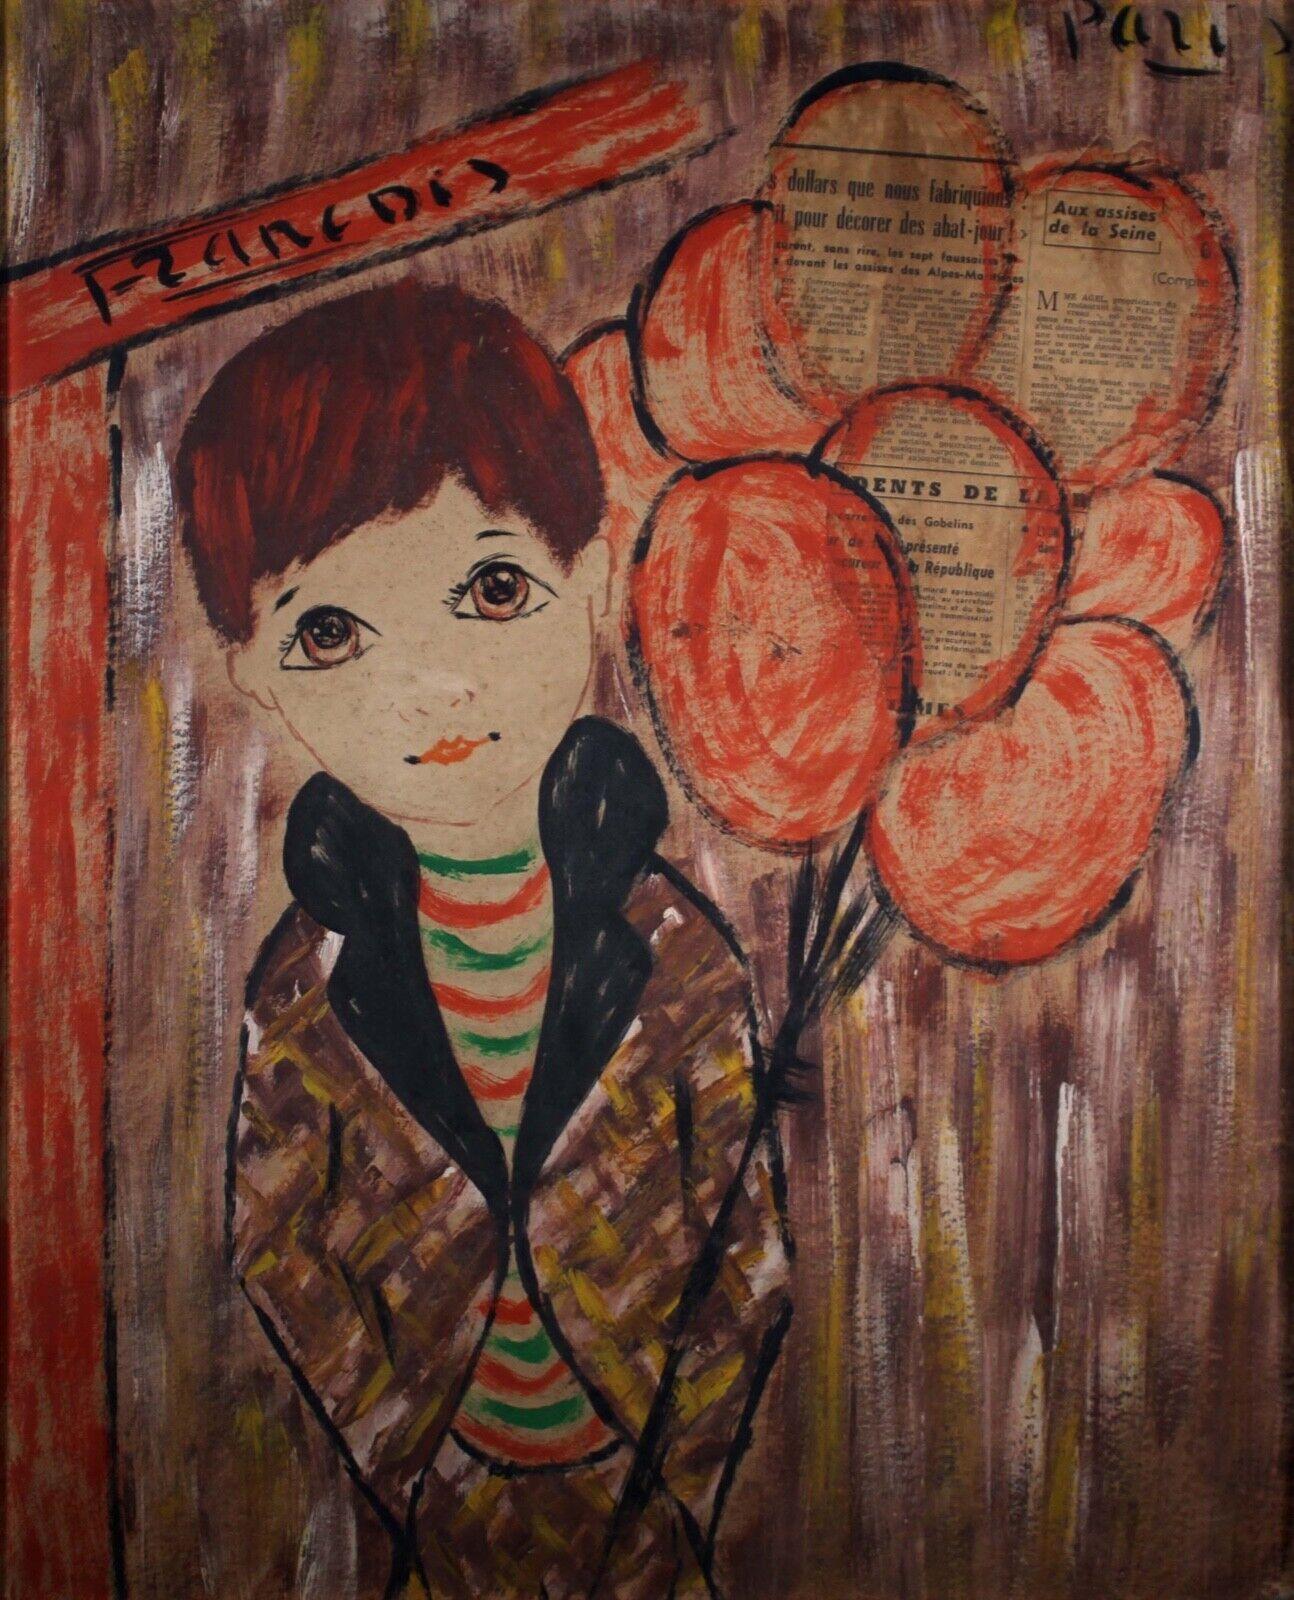 A whimsical and nostalgic mixed media on board by Francois of Paris. Signed on the top left. A big eyed boy holds balloons which are collaged with vintage French newsprint. Retro hues of orange and brown make a marvelous composition. Francois was